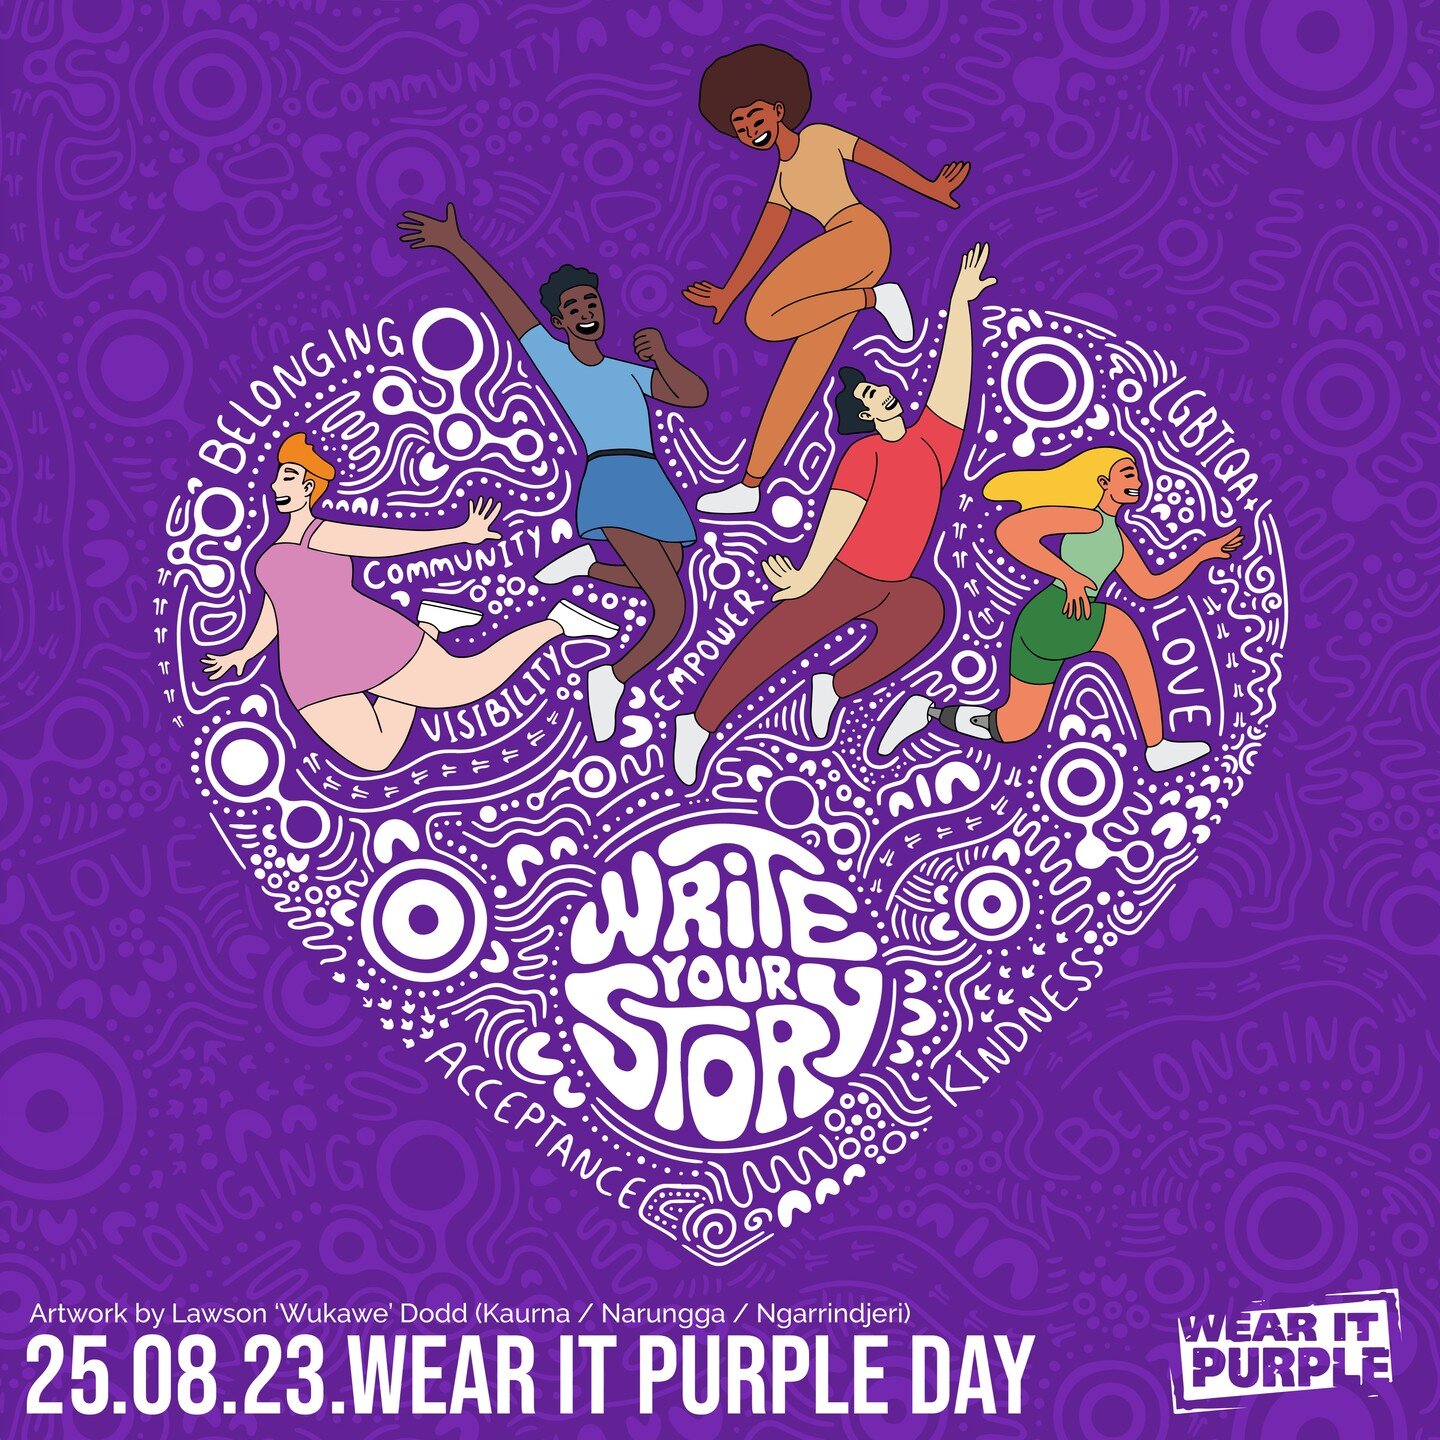 How will you recognise Wear it Purple day this year? 

This years theme &lsquo;Write your Story&rsquo; promotes Visibility, Community and Acceptance.🌈
https://www.wearitpurple.org/wipd-theme